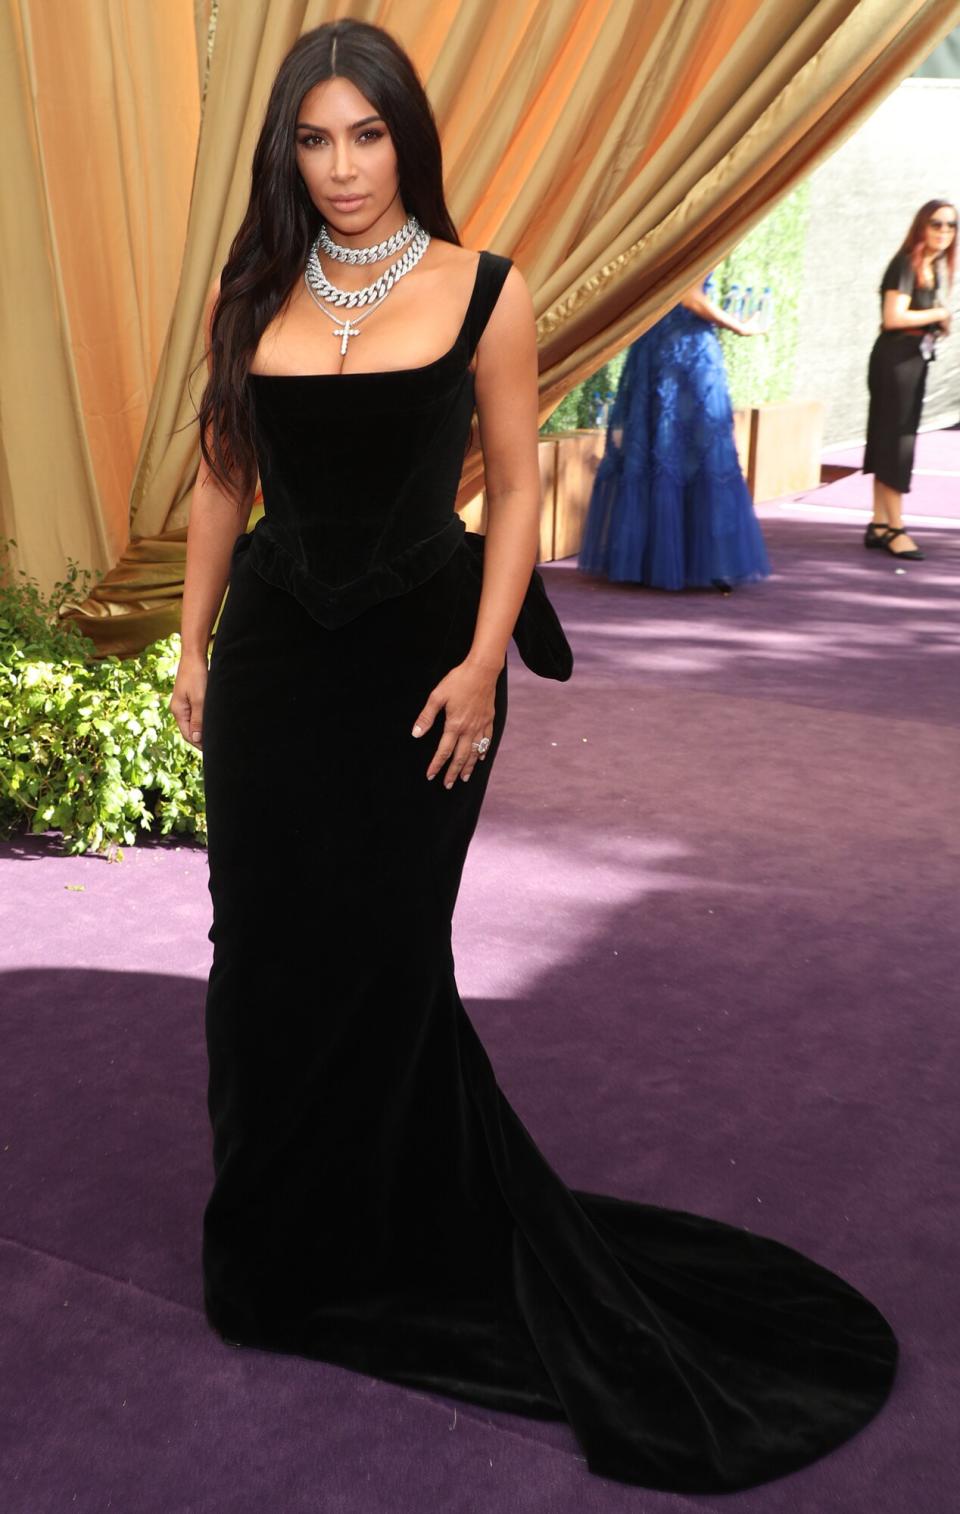 Kim Kardashian attends FOXS LIVE EMMY RED CARPET ARRIVALS during the 71ST PRIMETIME EMMY AWARDS airing live from the Microsoft Theater at L.A. LIVE in Los Angeles on Sunday, September 22 (7:00-8:00 PM ET live/4:00-5:00 PM PT live) on FOX